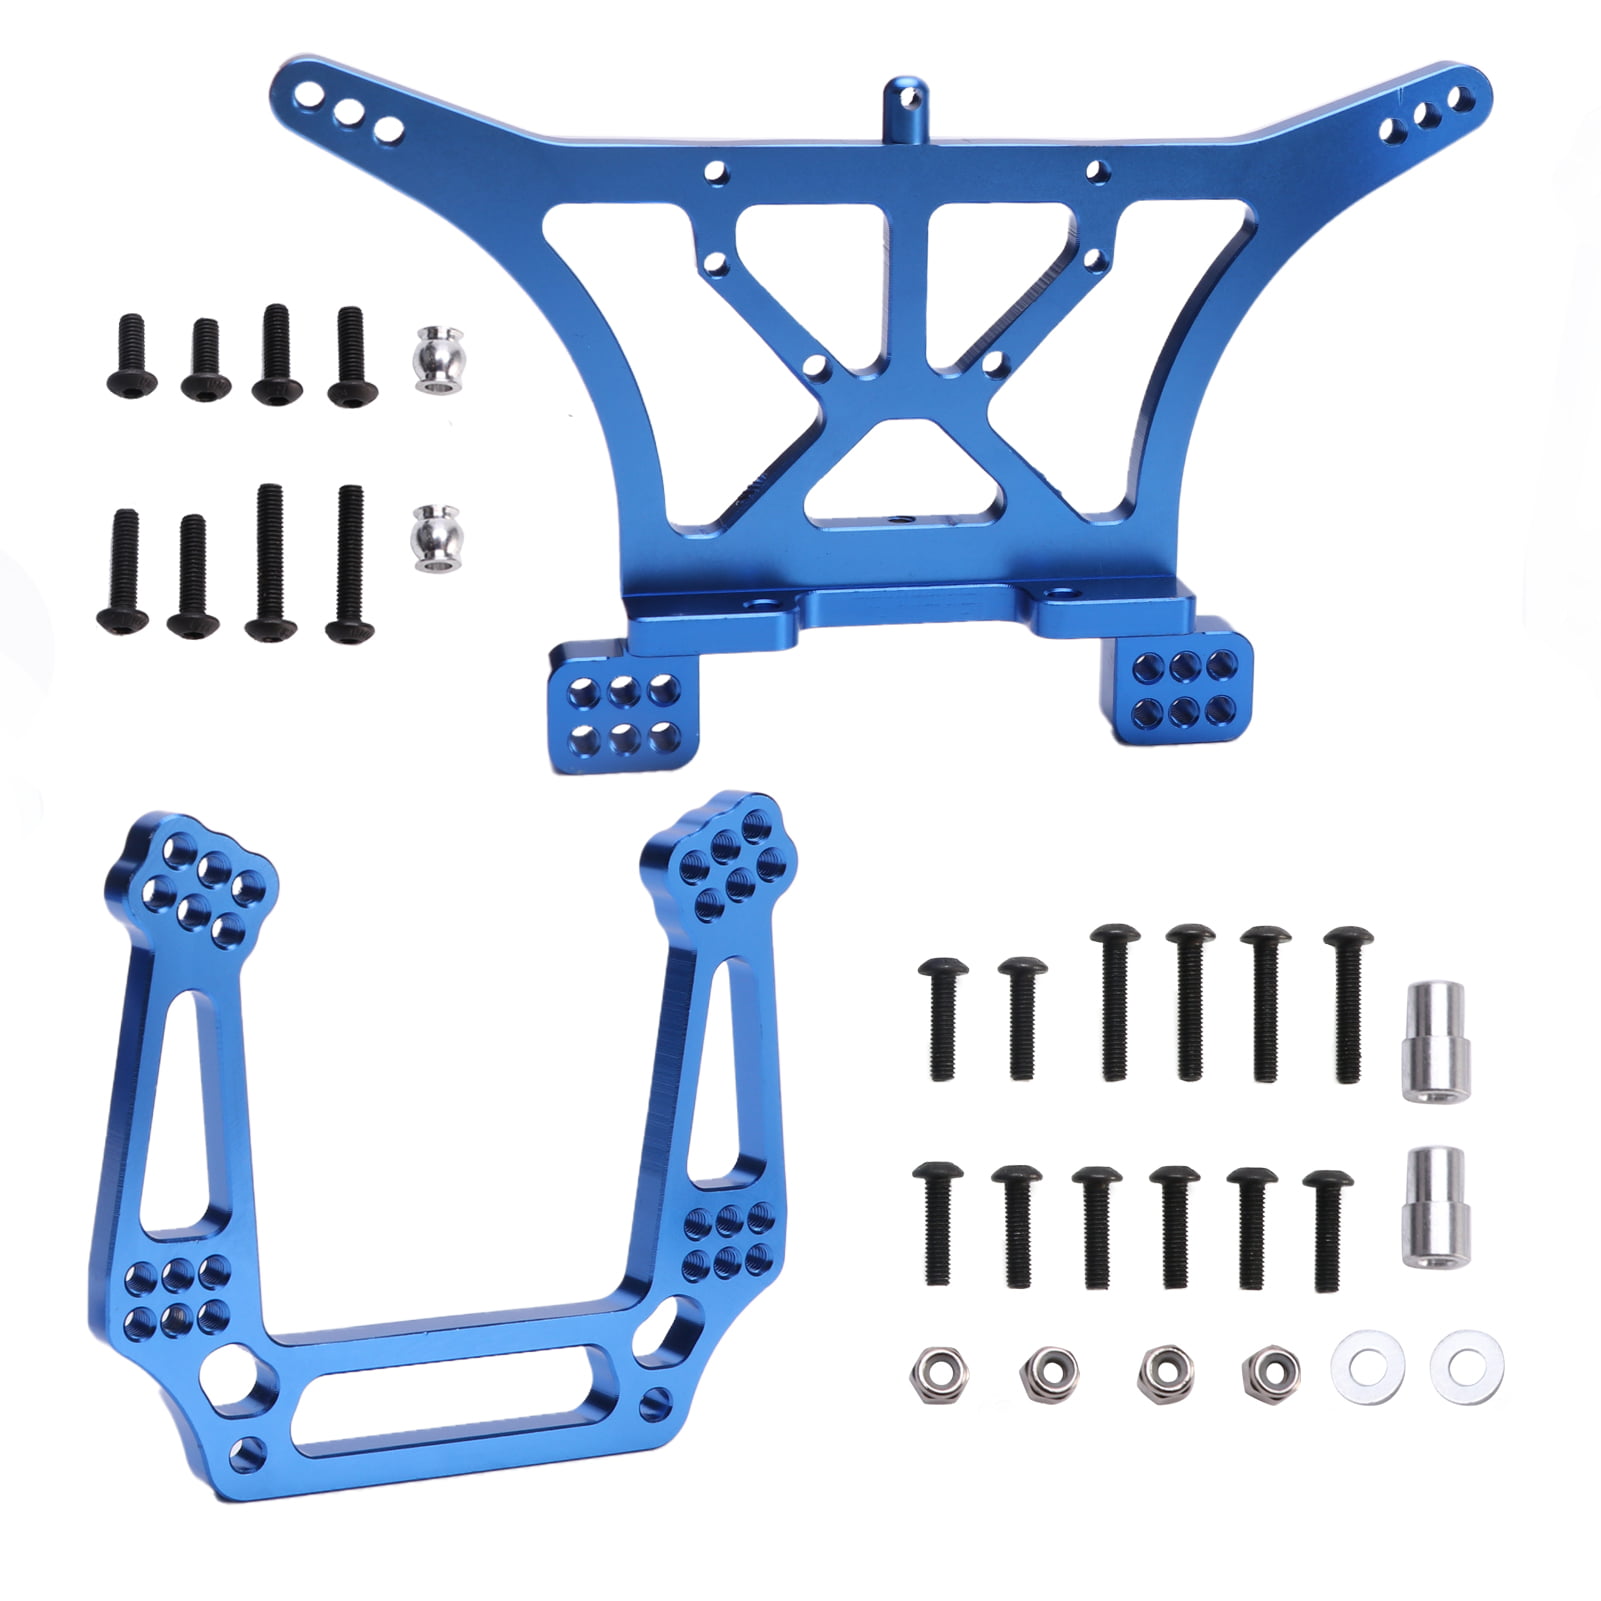 Blue-Anodized Alloy Rear Shock Tower 3638 for 1/10 Traxxas Slash Stampede 2WD Upgrade Parts 